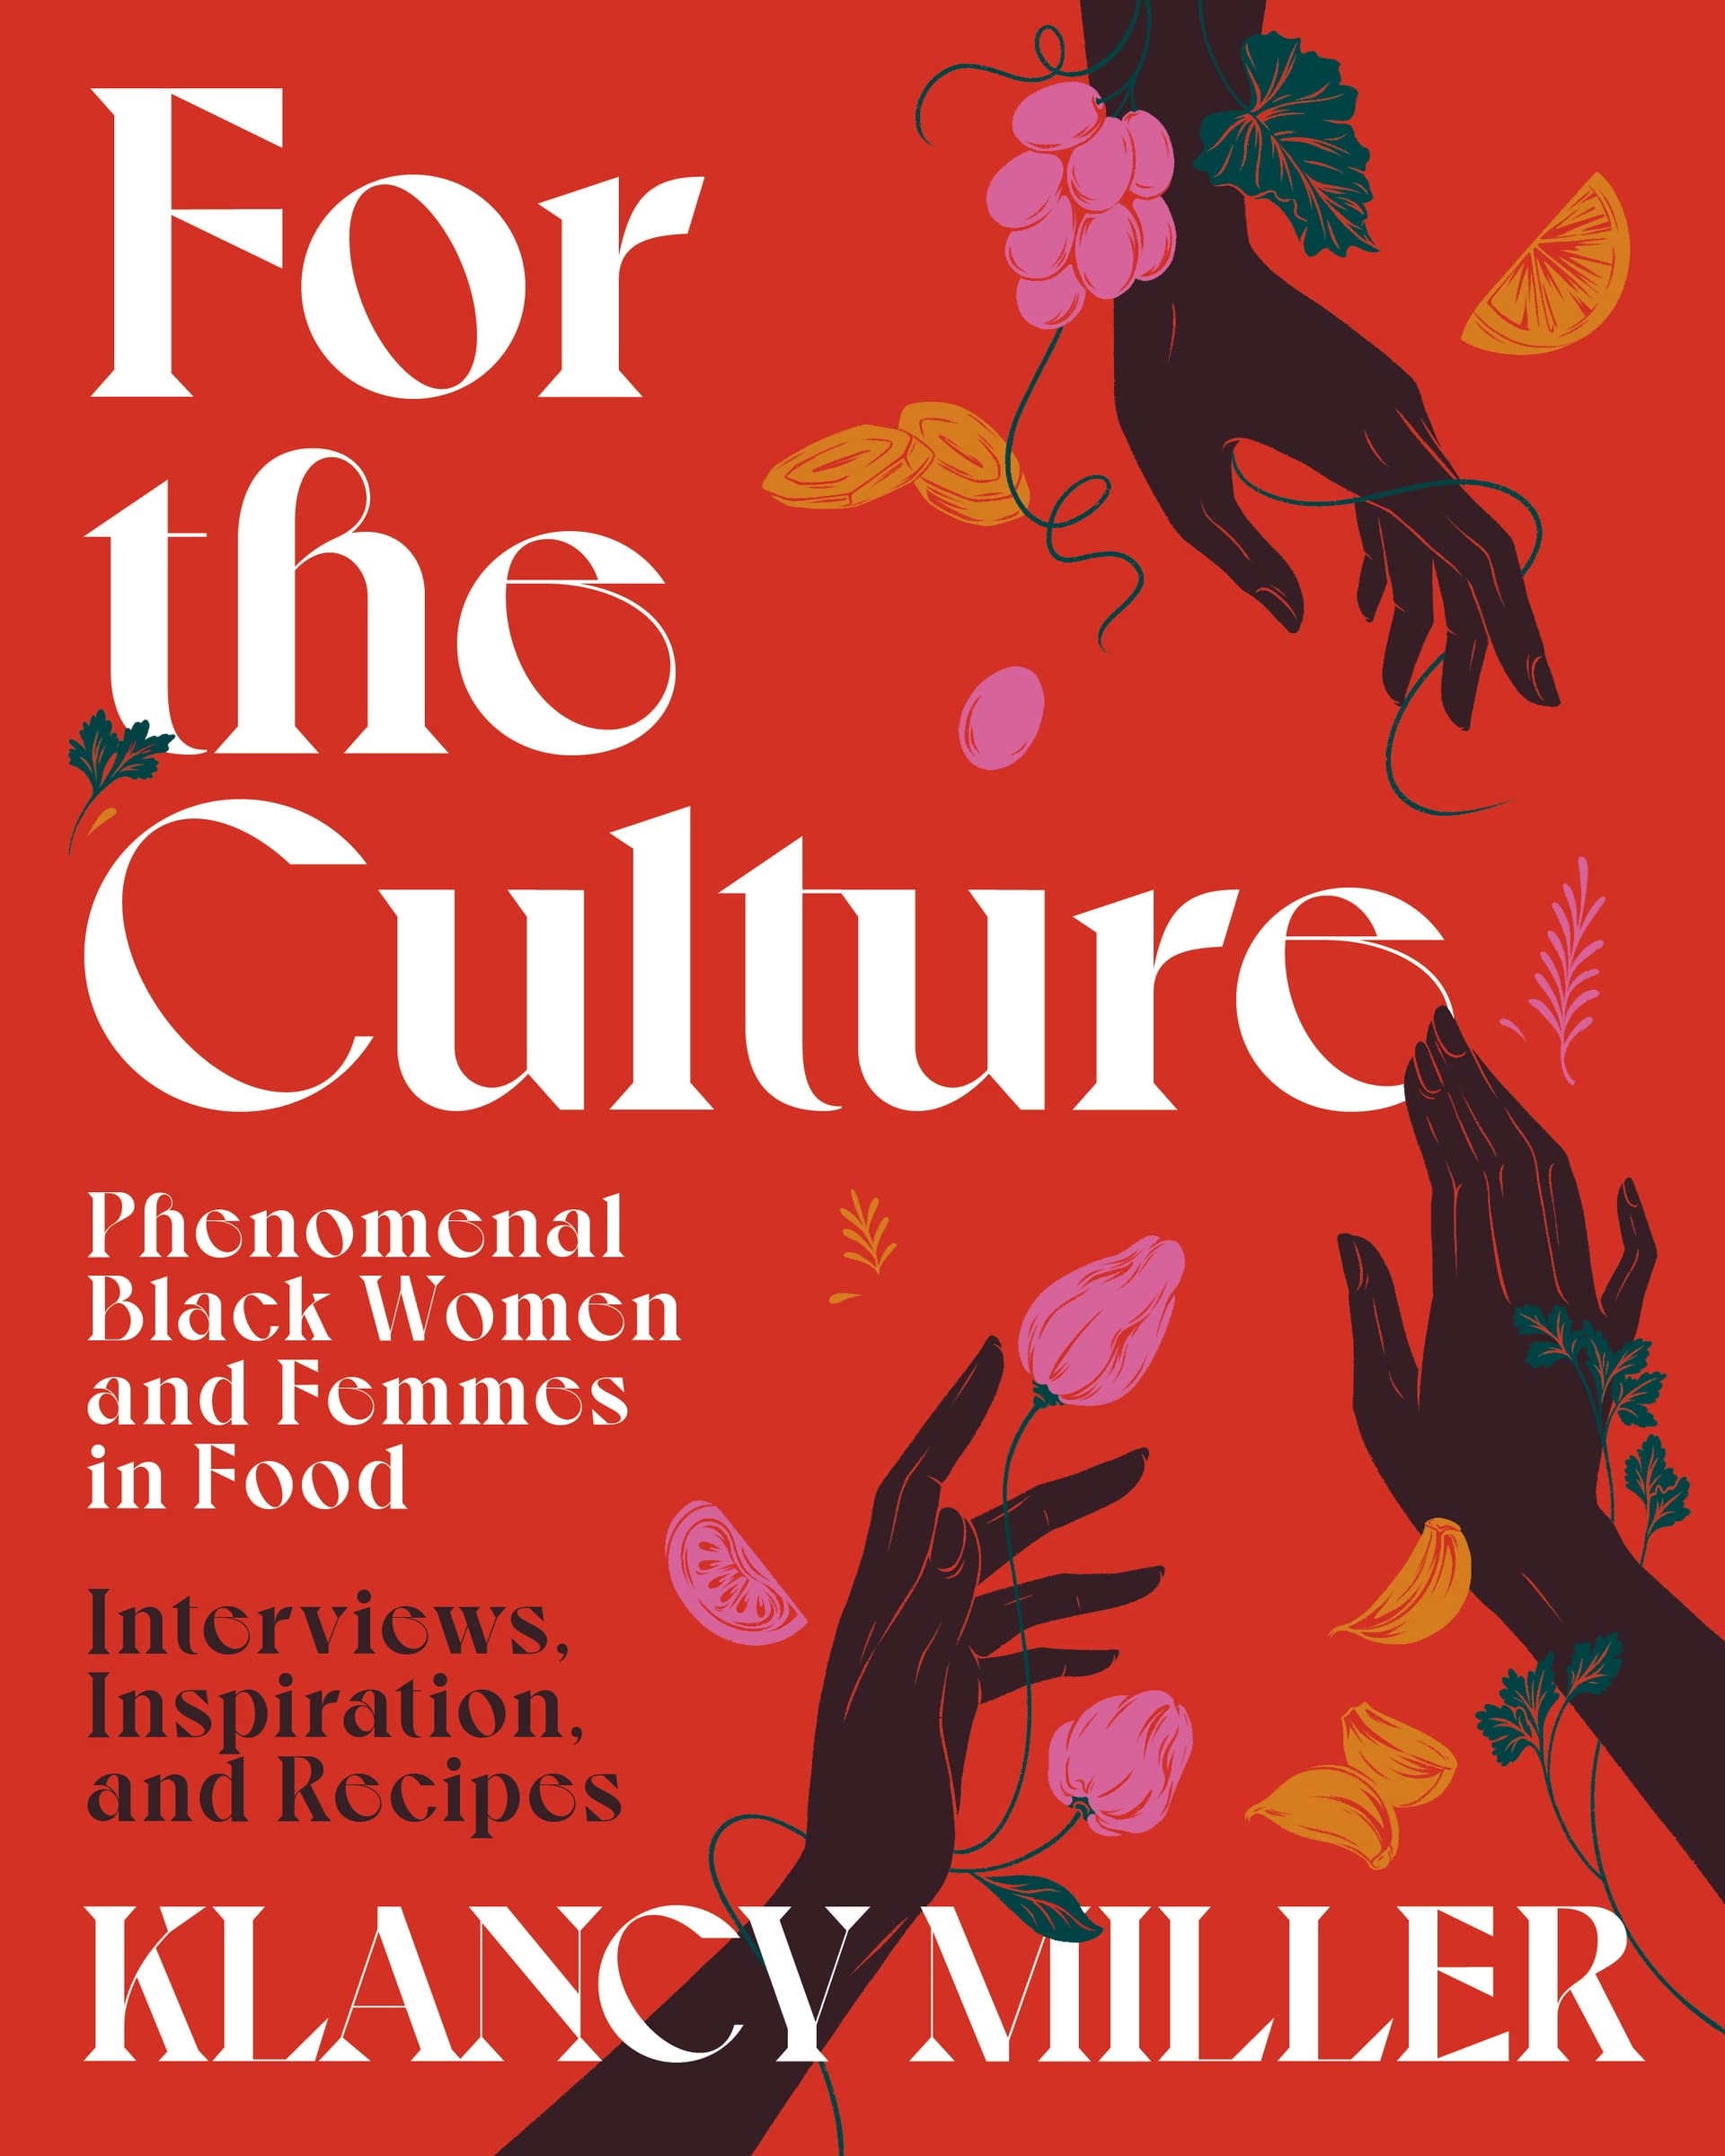 For The Culture: Phenomenal Black Women and Femmes in Food: Interviews, Inspiration, and Recipes (Klancy Miller) *Signed*